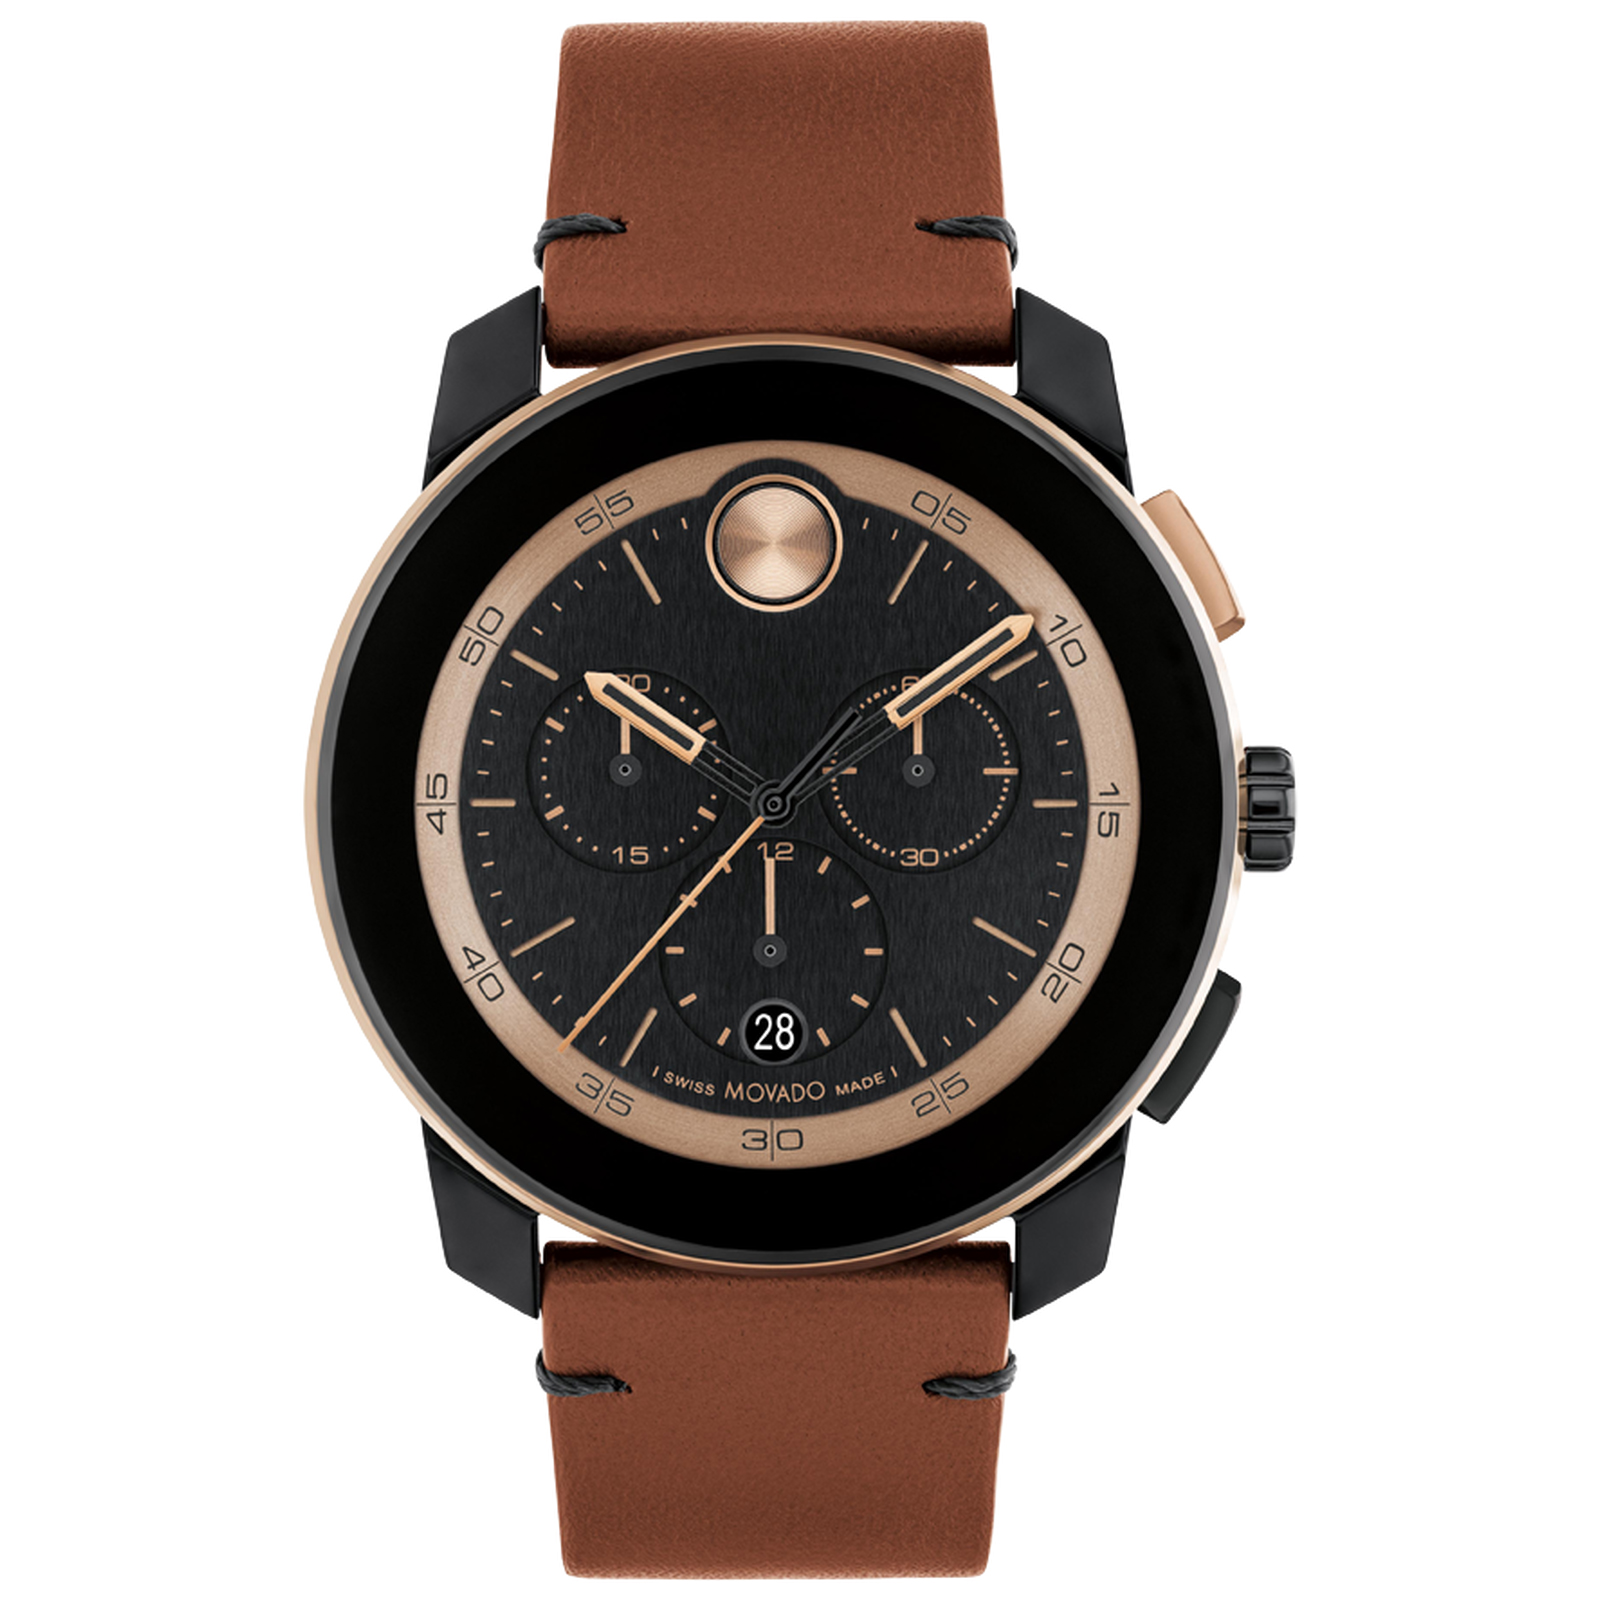 BOLD TR90 Chronograph Black Dial Brown Leather Strap Watch 43.5mm - Movado 3601115